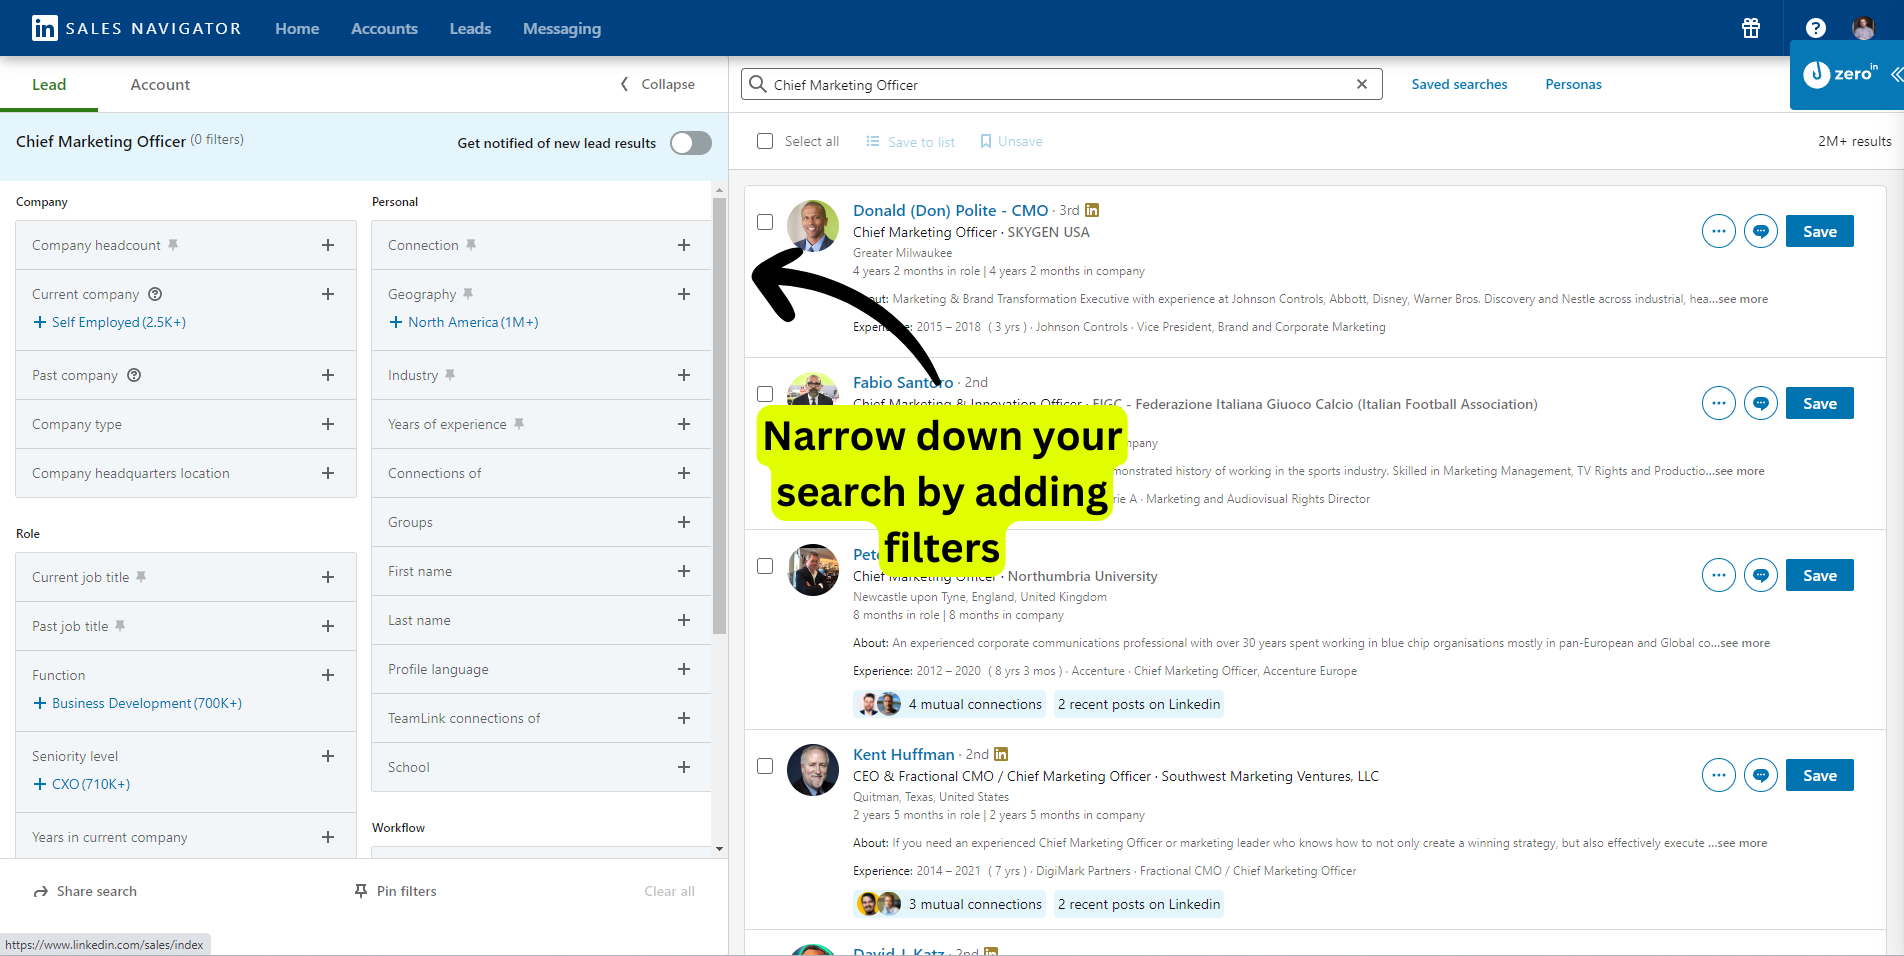 Narrow down your search by adding LinkedIn Sales Navigator filters